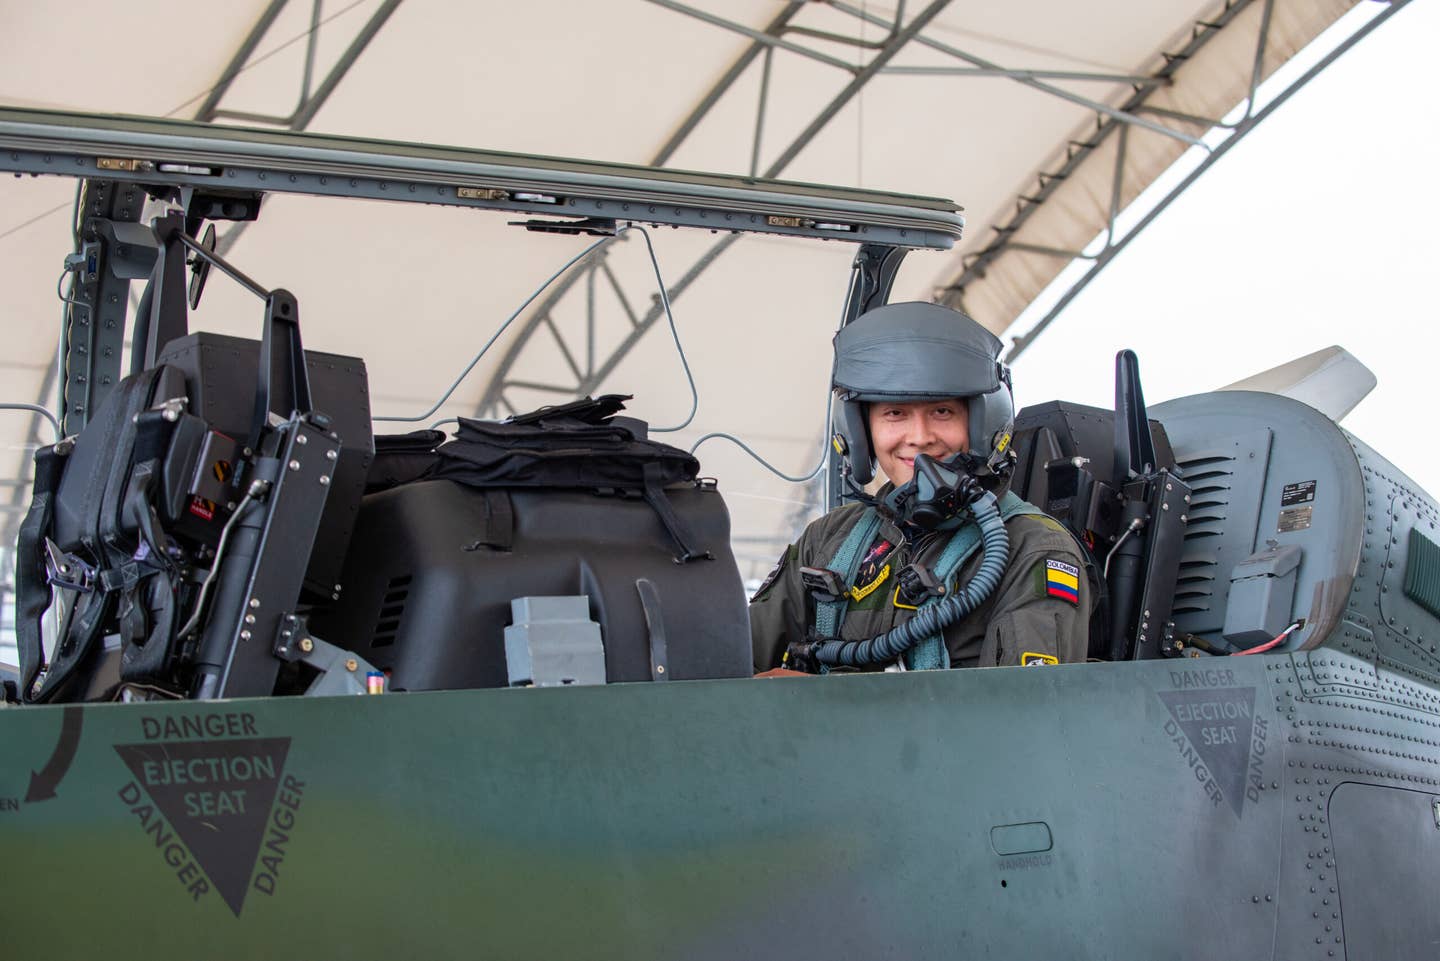 Colombian Air Force Carreno “Tifon”, a copilot, poses for a photograph before an experimentation flight in the AT-6E Wolverine at Moody Air Force Base, Georgia, April 14, 2022. The flight focused on digitally tracking friendly forces and potential enemy movement using AERONet software. <em>U.S. Air Force photo by Airman 1st Class Courtney Sebastianelli</em>